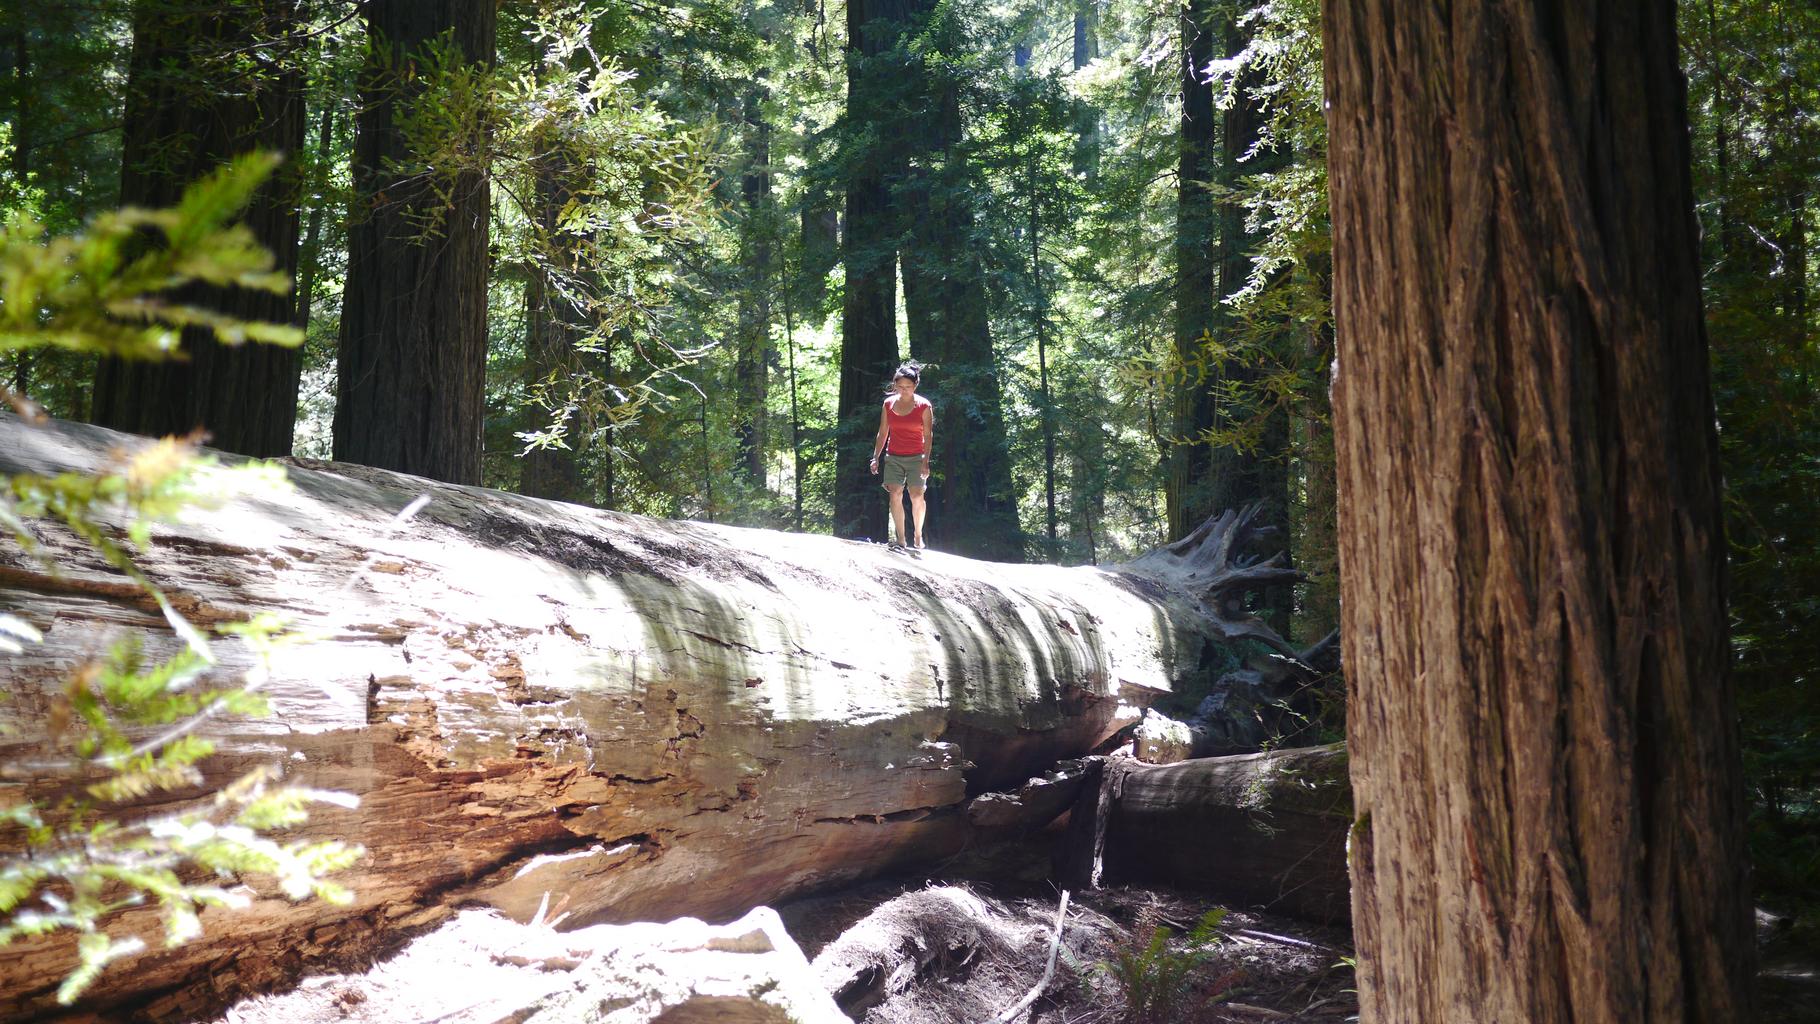 Giant redwood forests in California